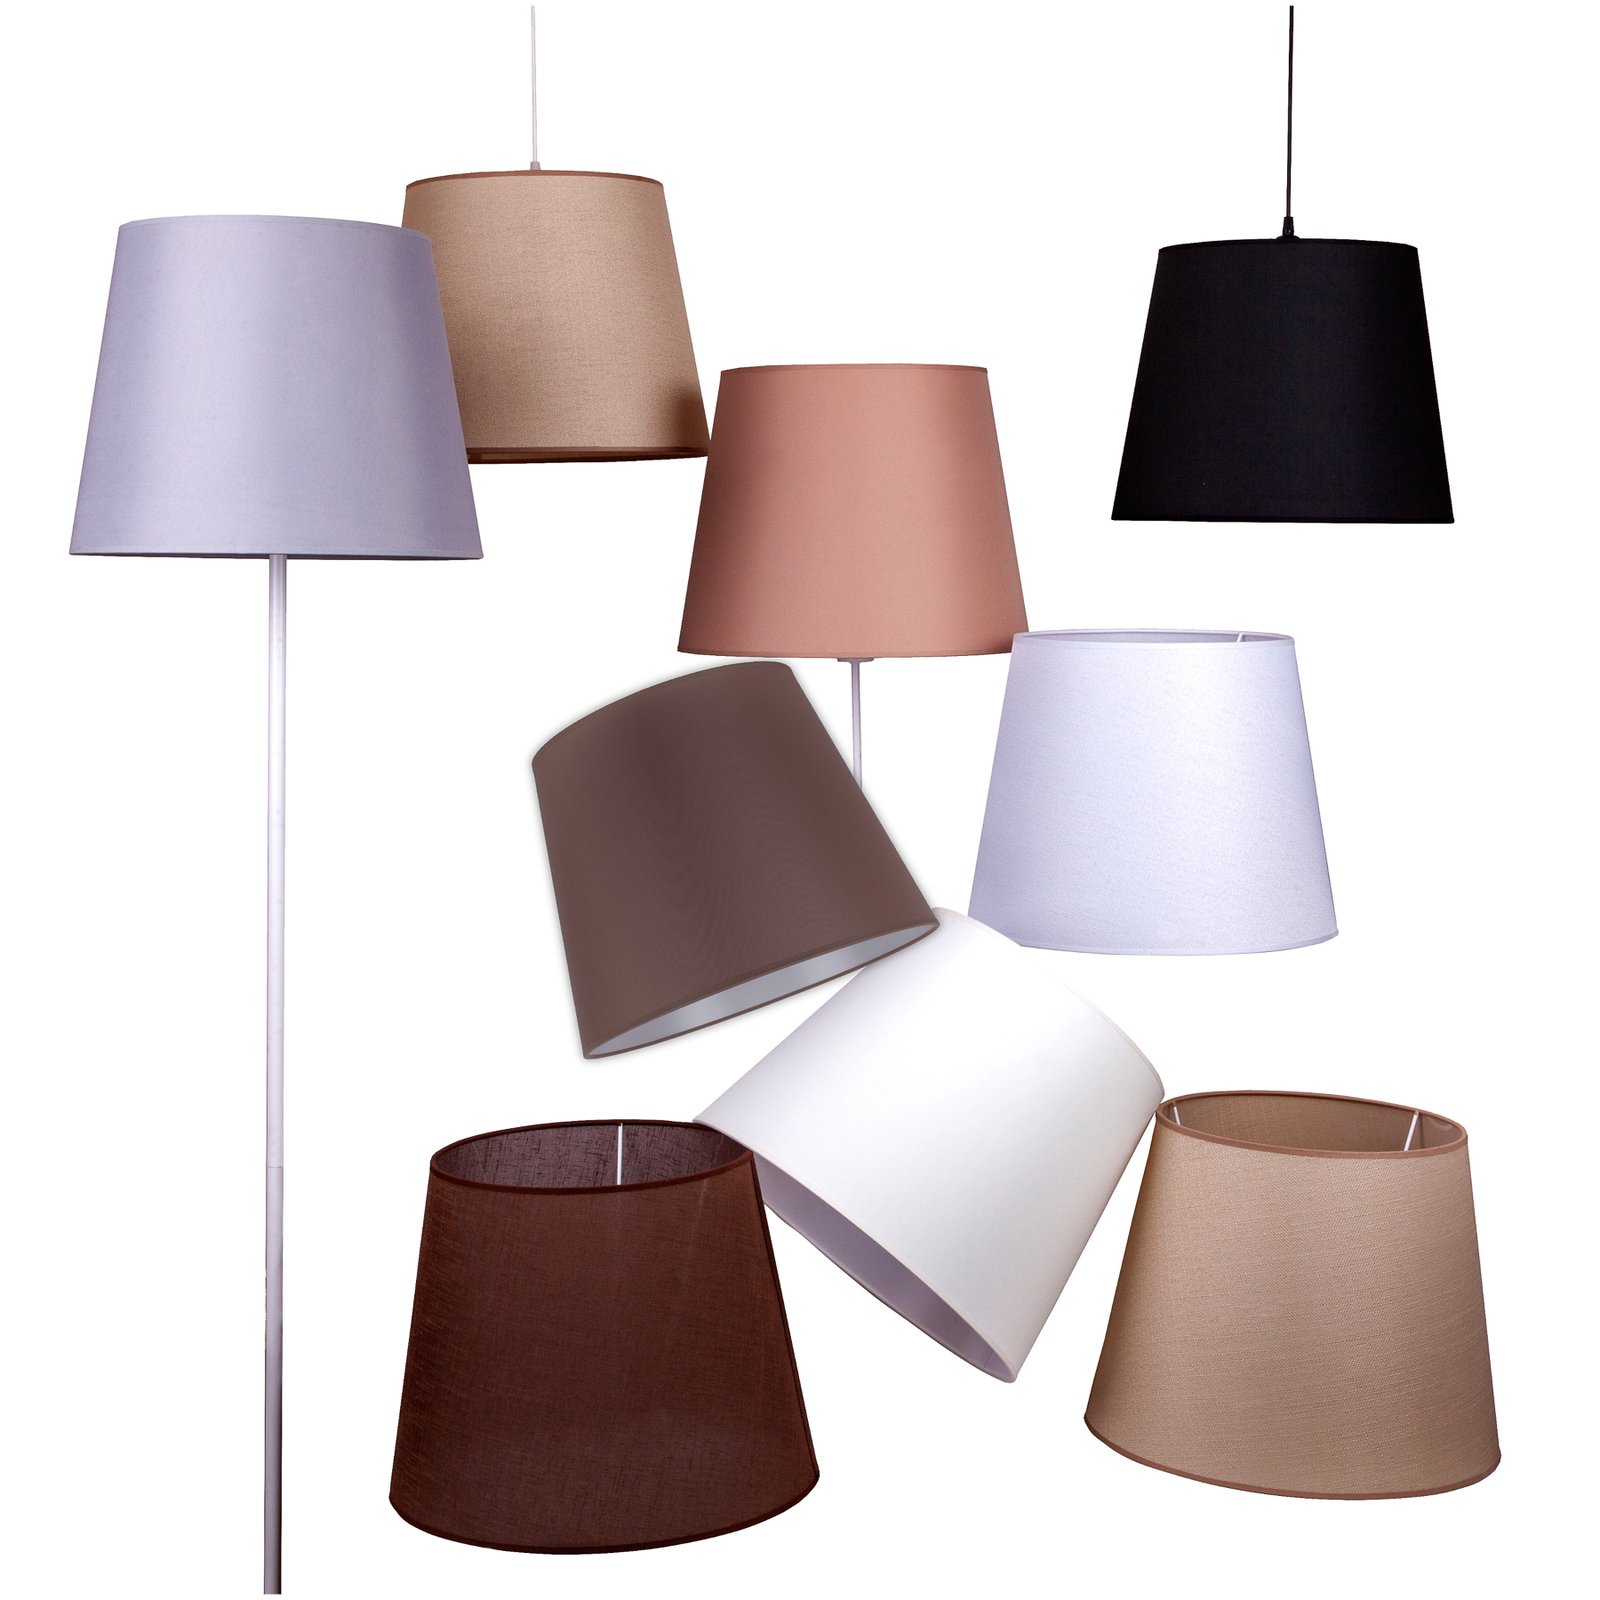 Classic L lampshade for floor lamps, grey